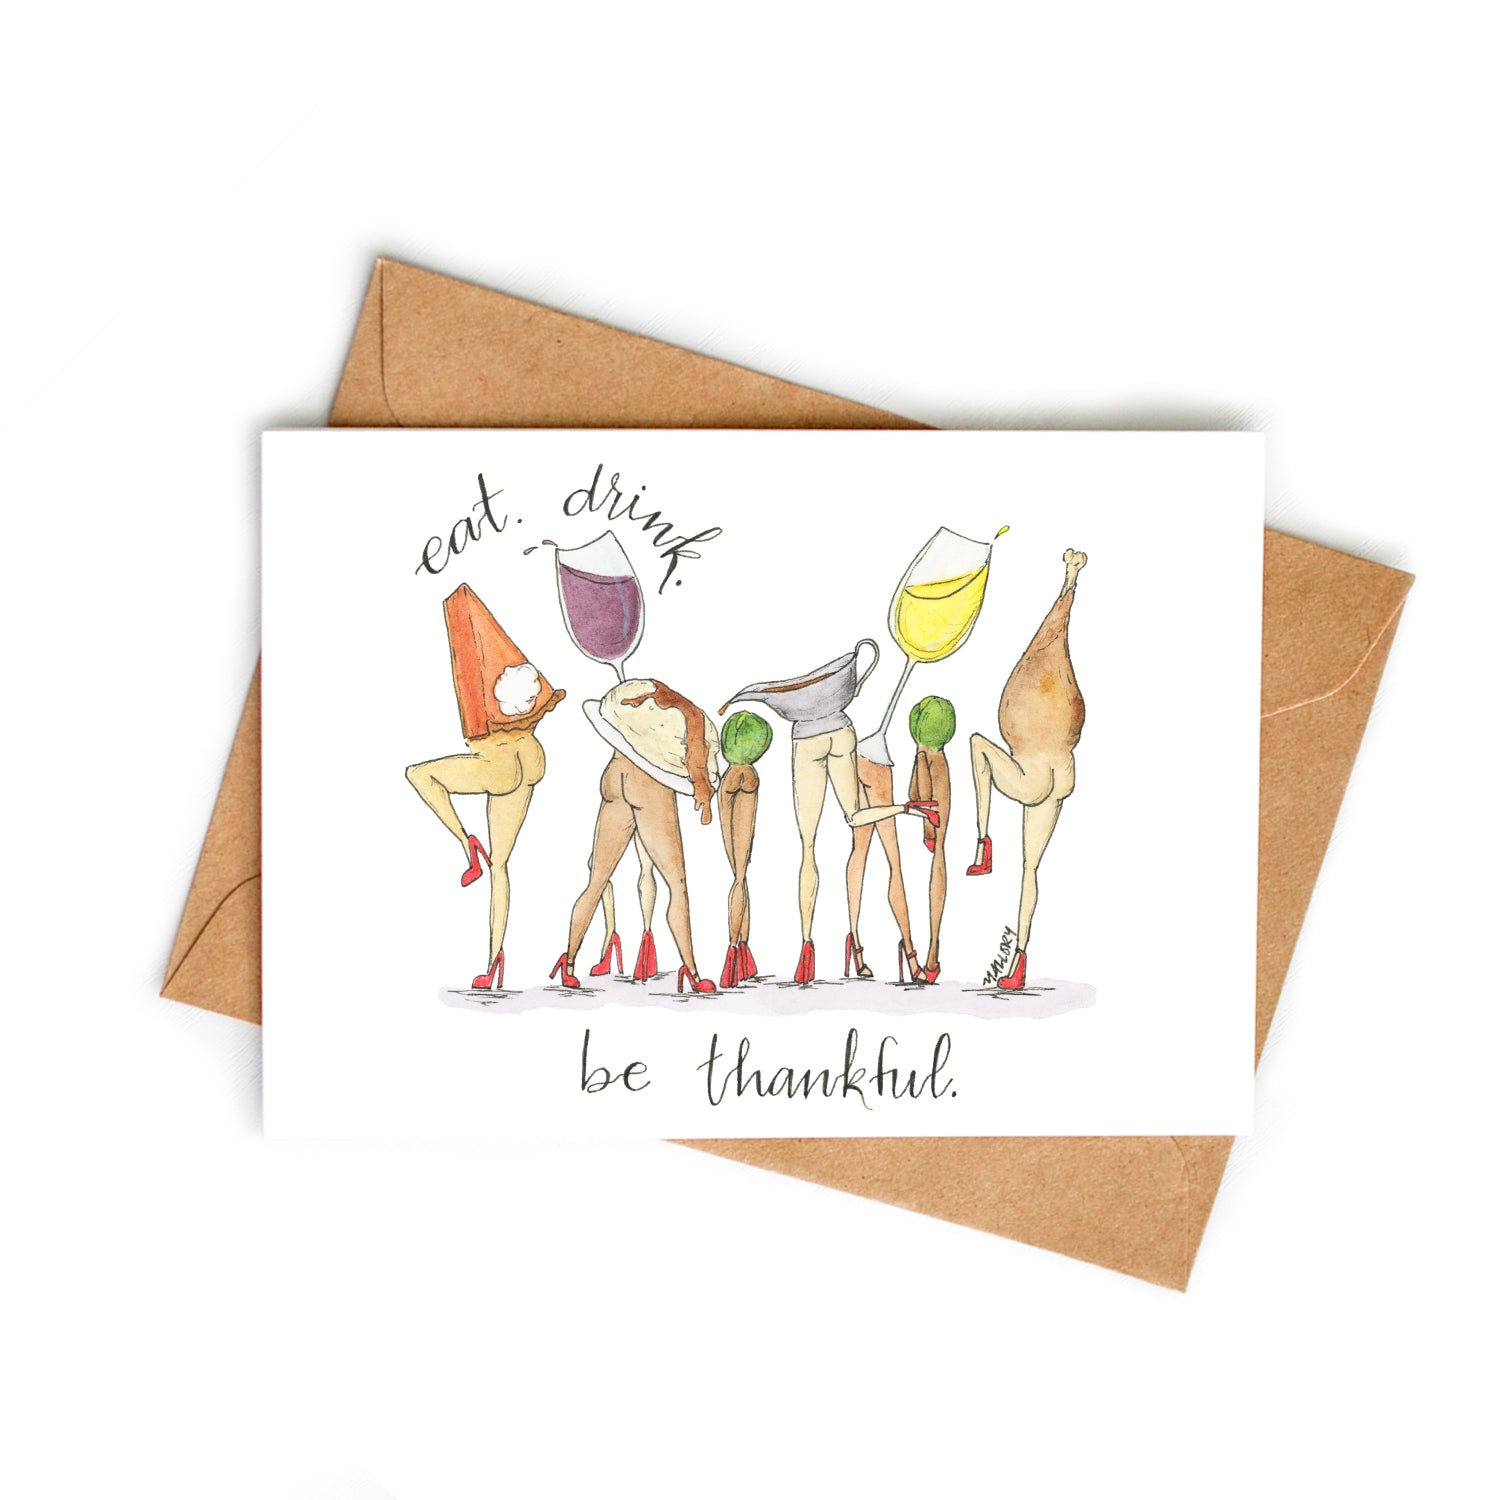 Thanksgiving or Friendsgiving card depicts a funny image with Thanksgiving food with legs. The food is dancing with wine and the phrase, "eat. drink. be thankful." is hand-lettered.